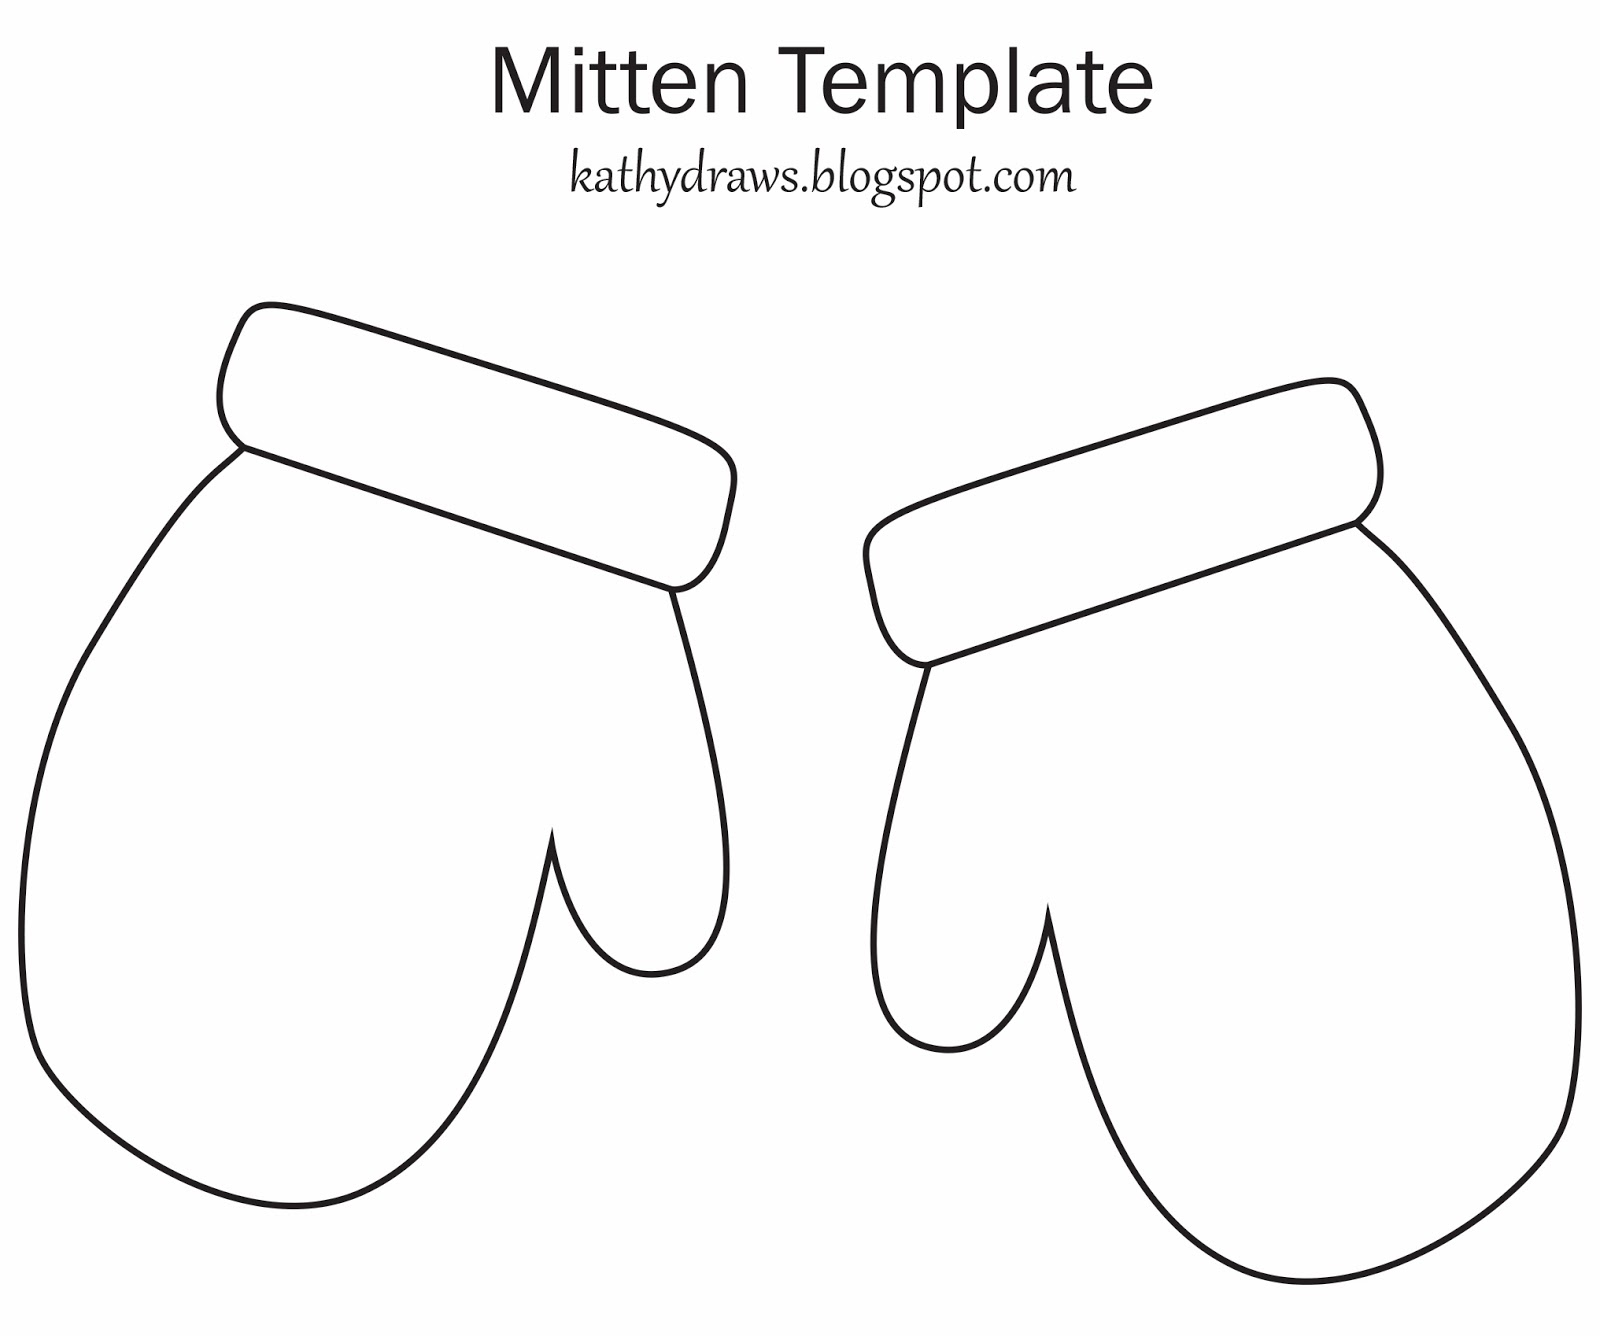 mitten black and white clipart - Clip Art Library